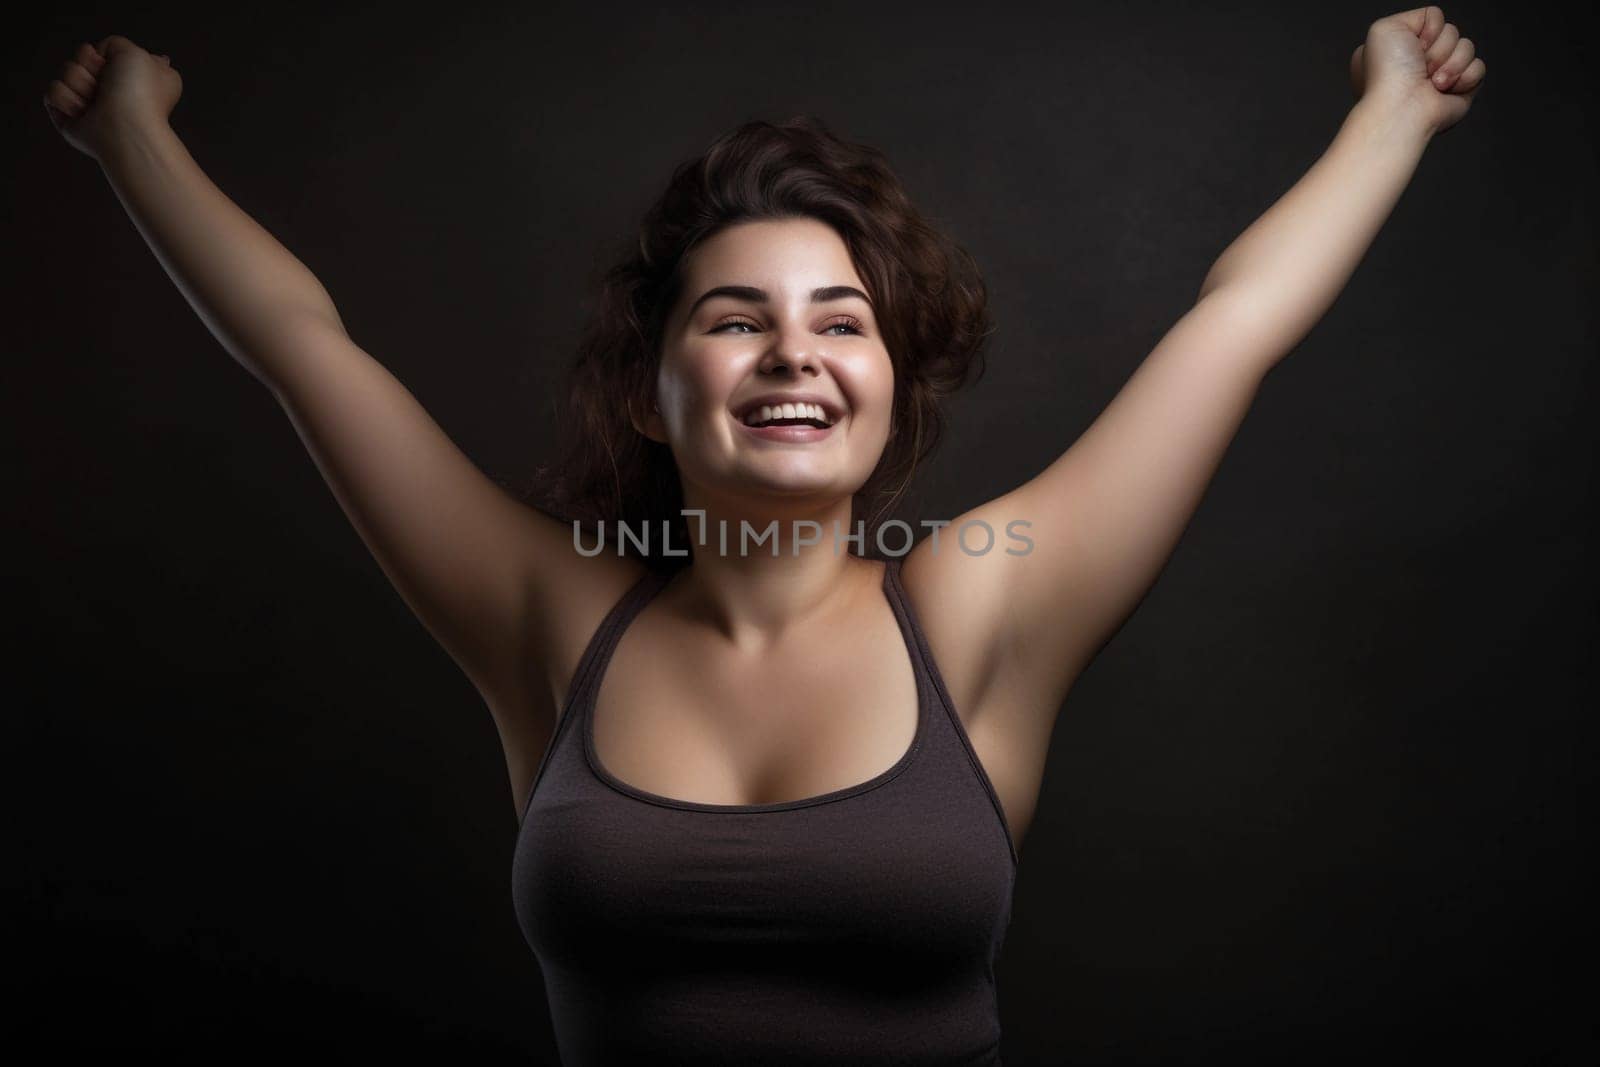 A woman with her arms up in the air AI generation by gulyaevstudio